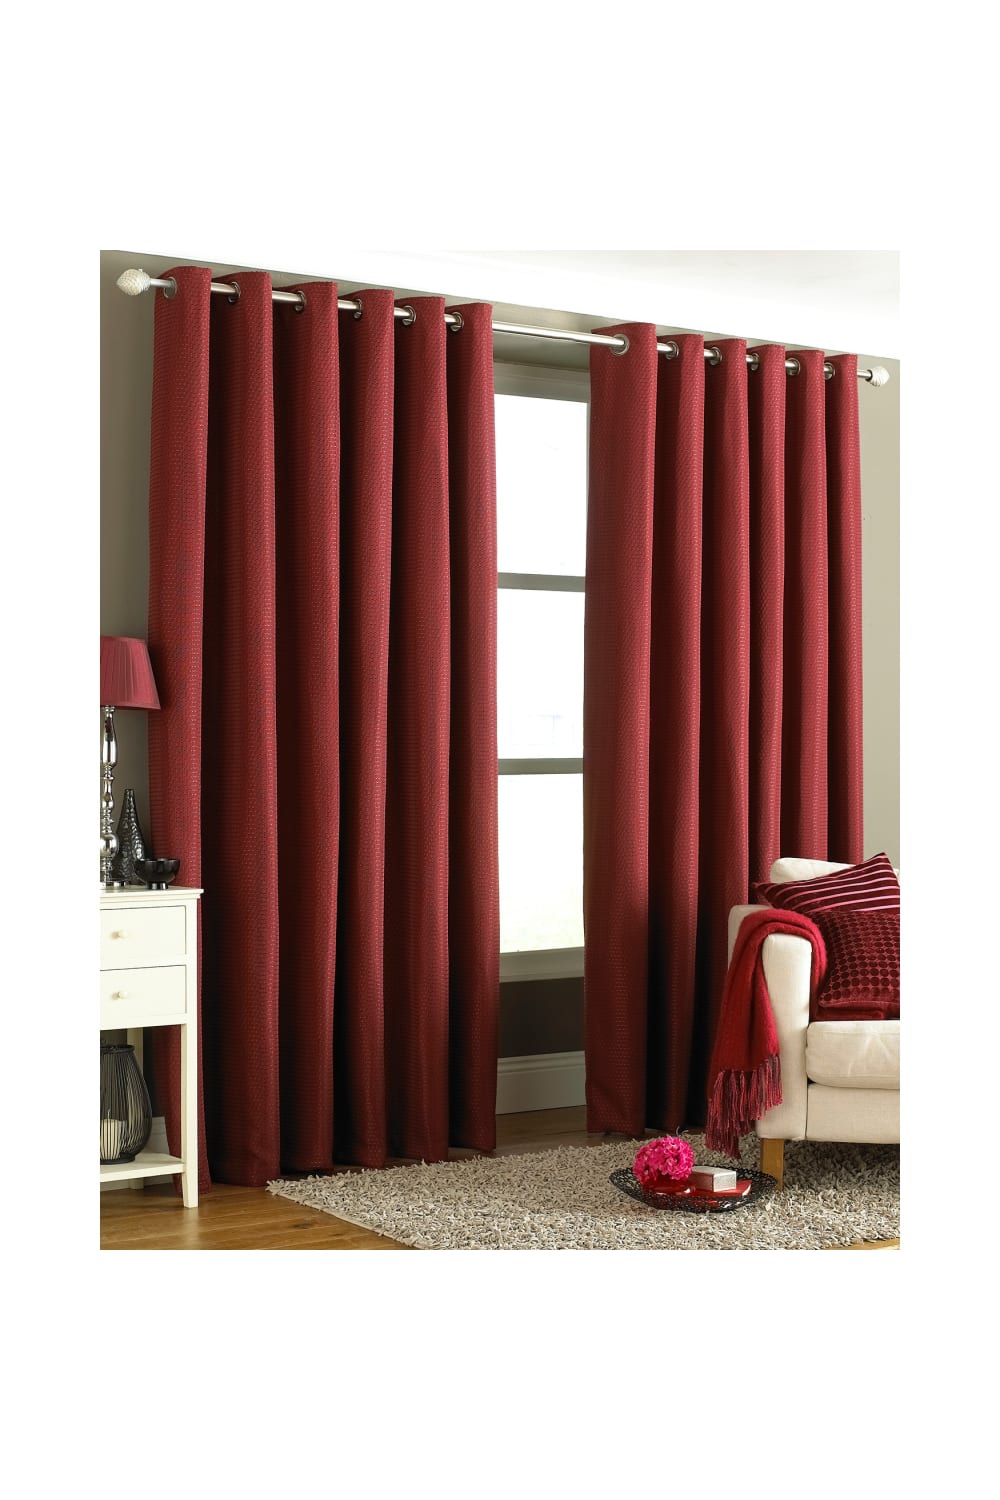 Riva Home Tobago Ringtop Curtains (Burgundy) (90 x 90 inch)